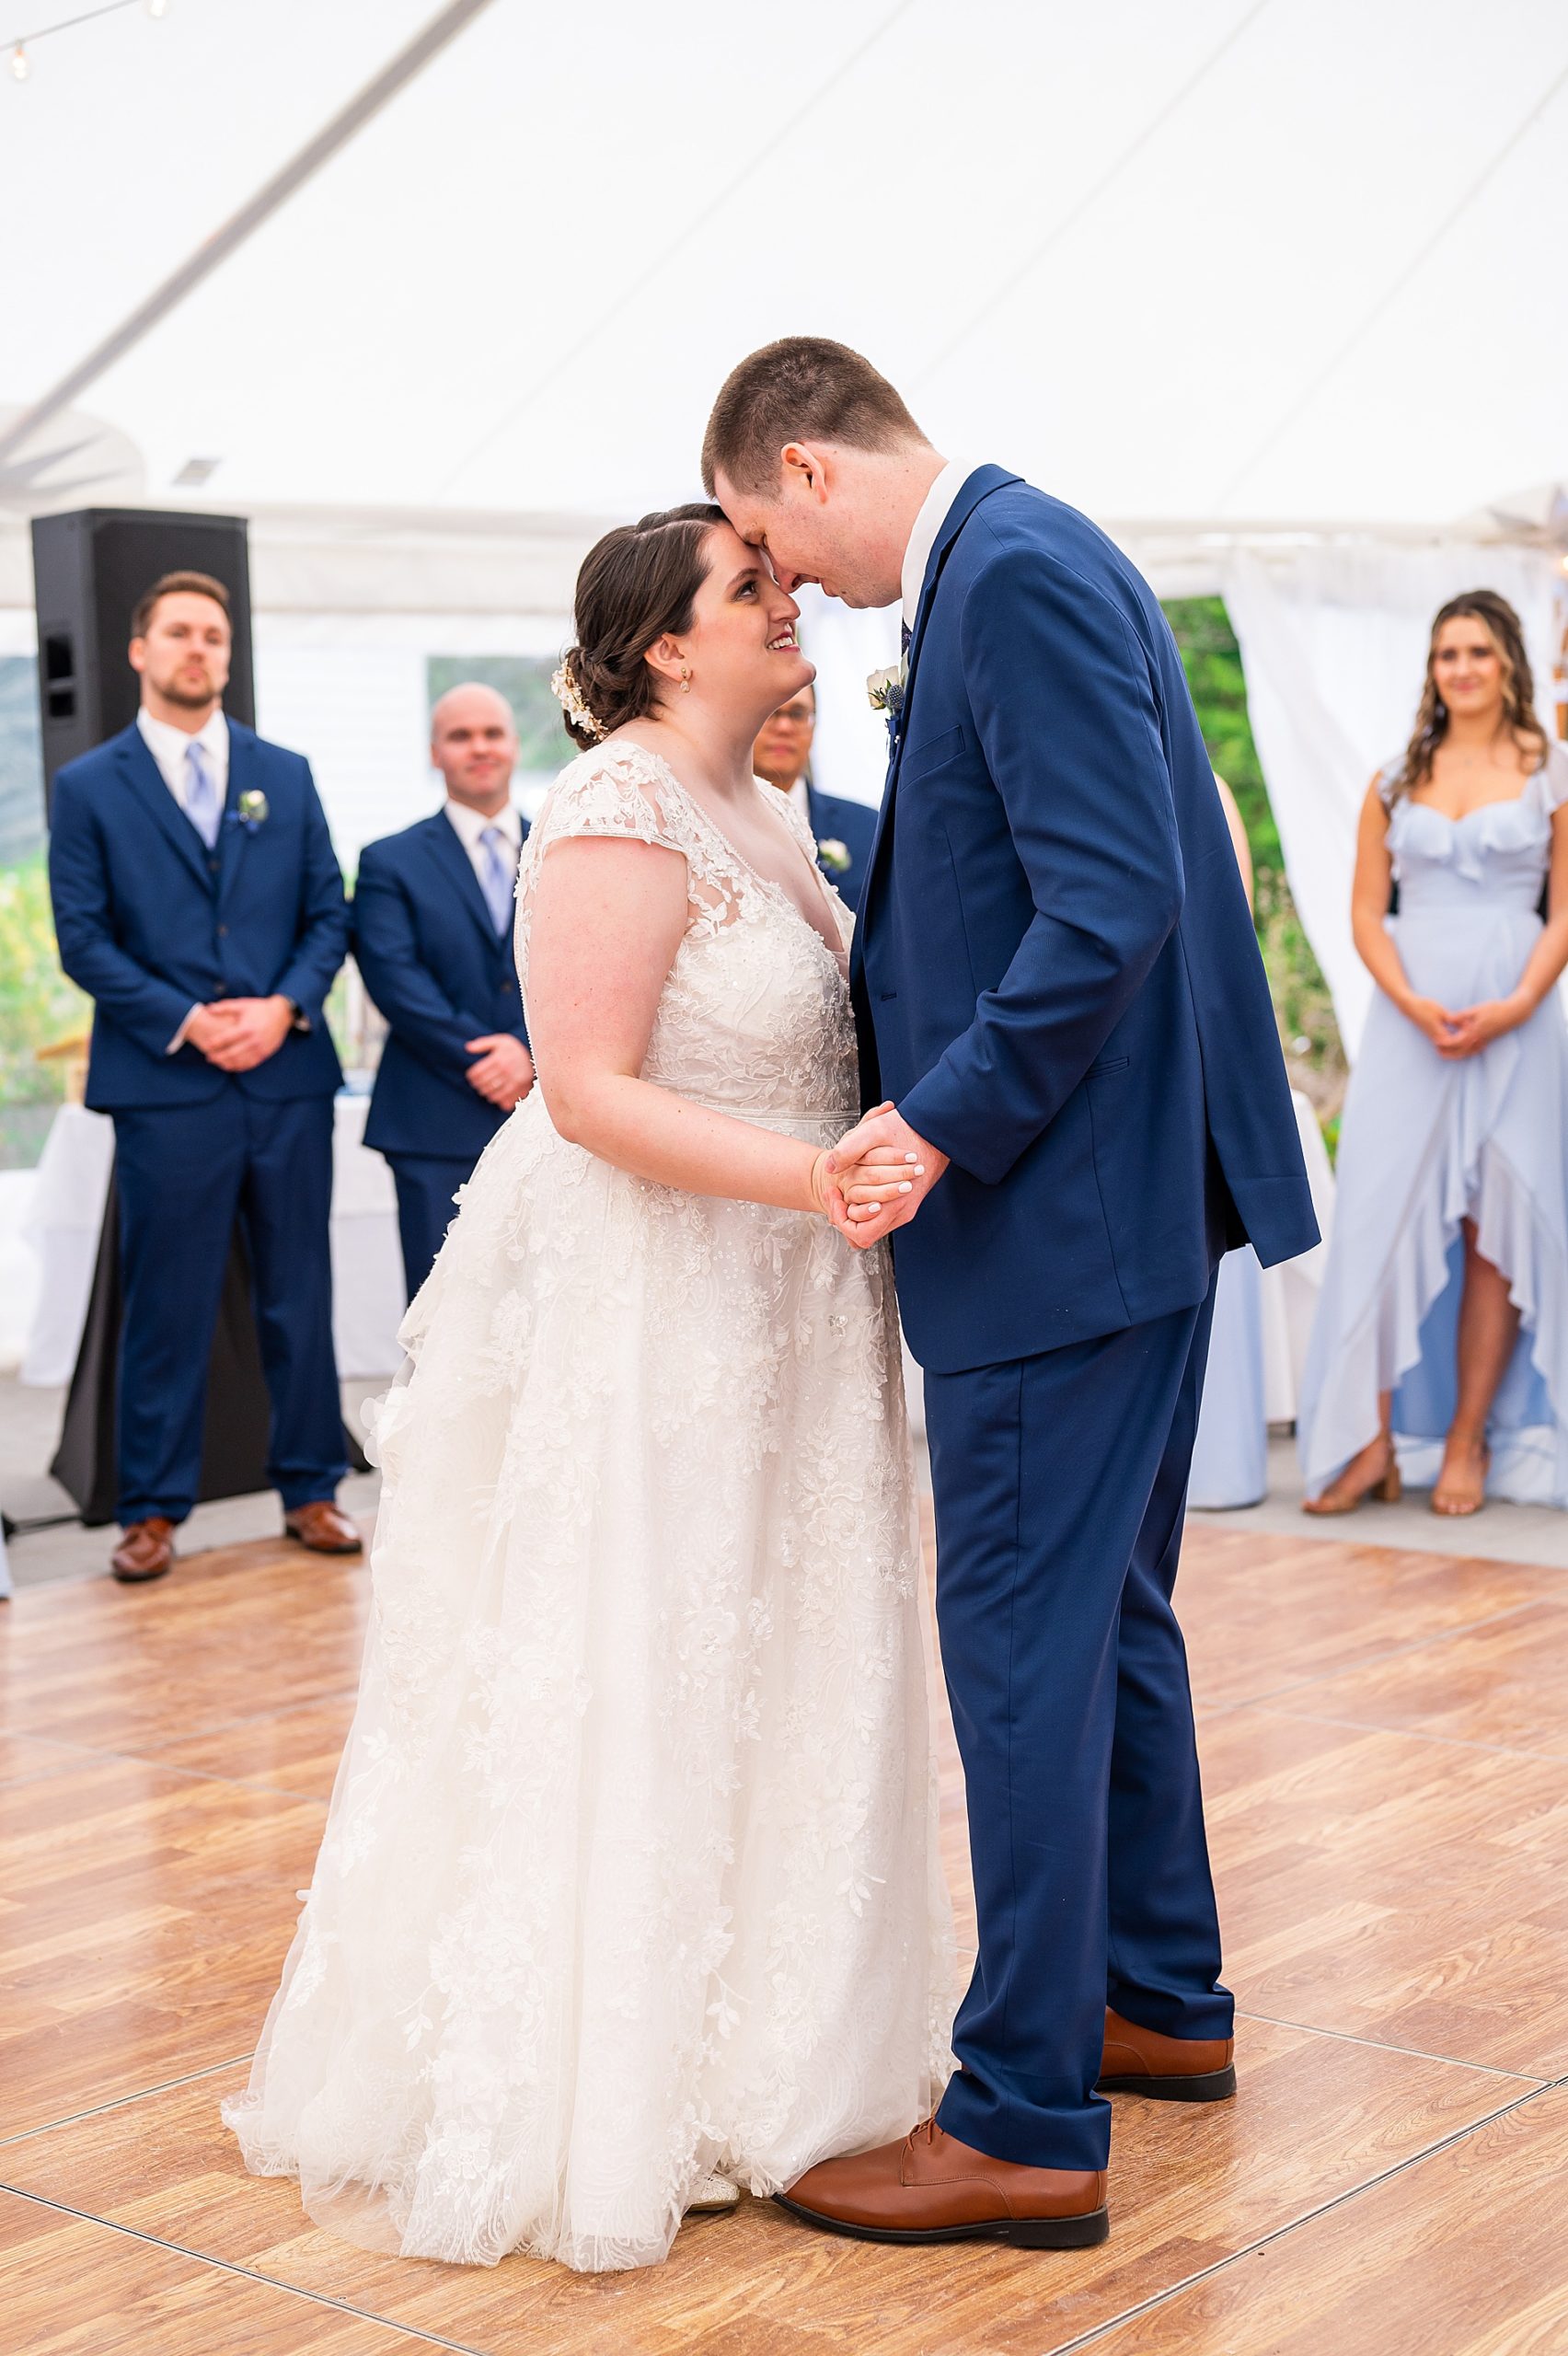 bride and groom share first dance at reception